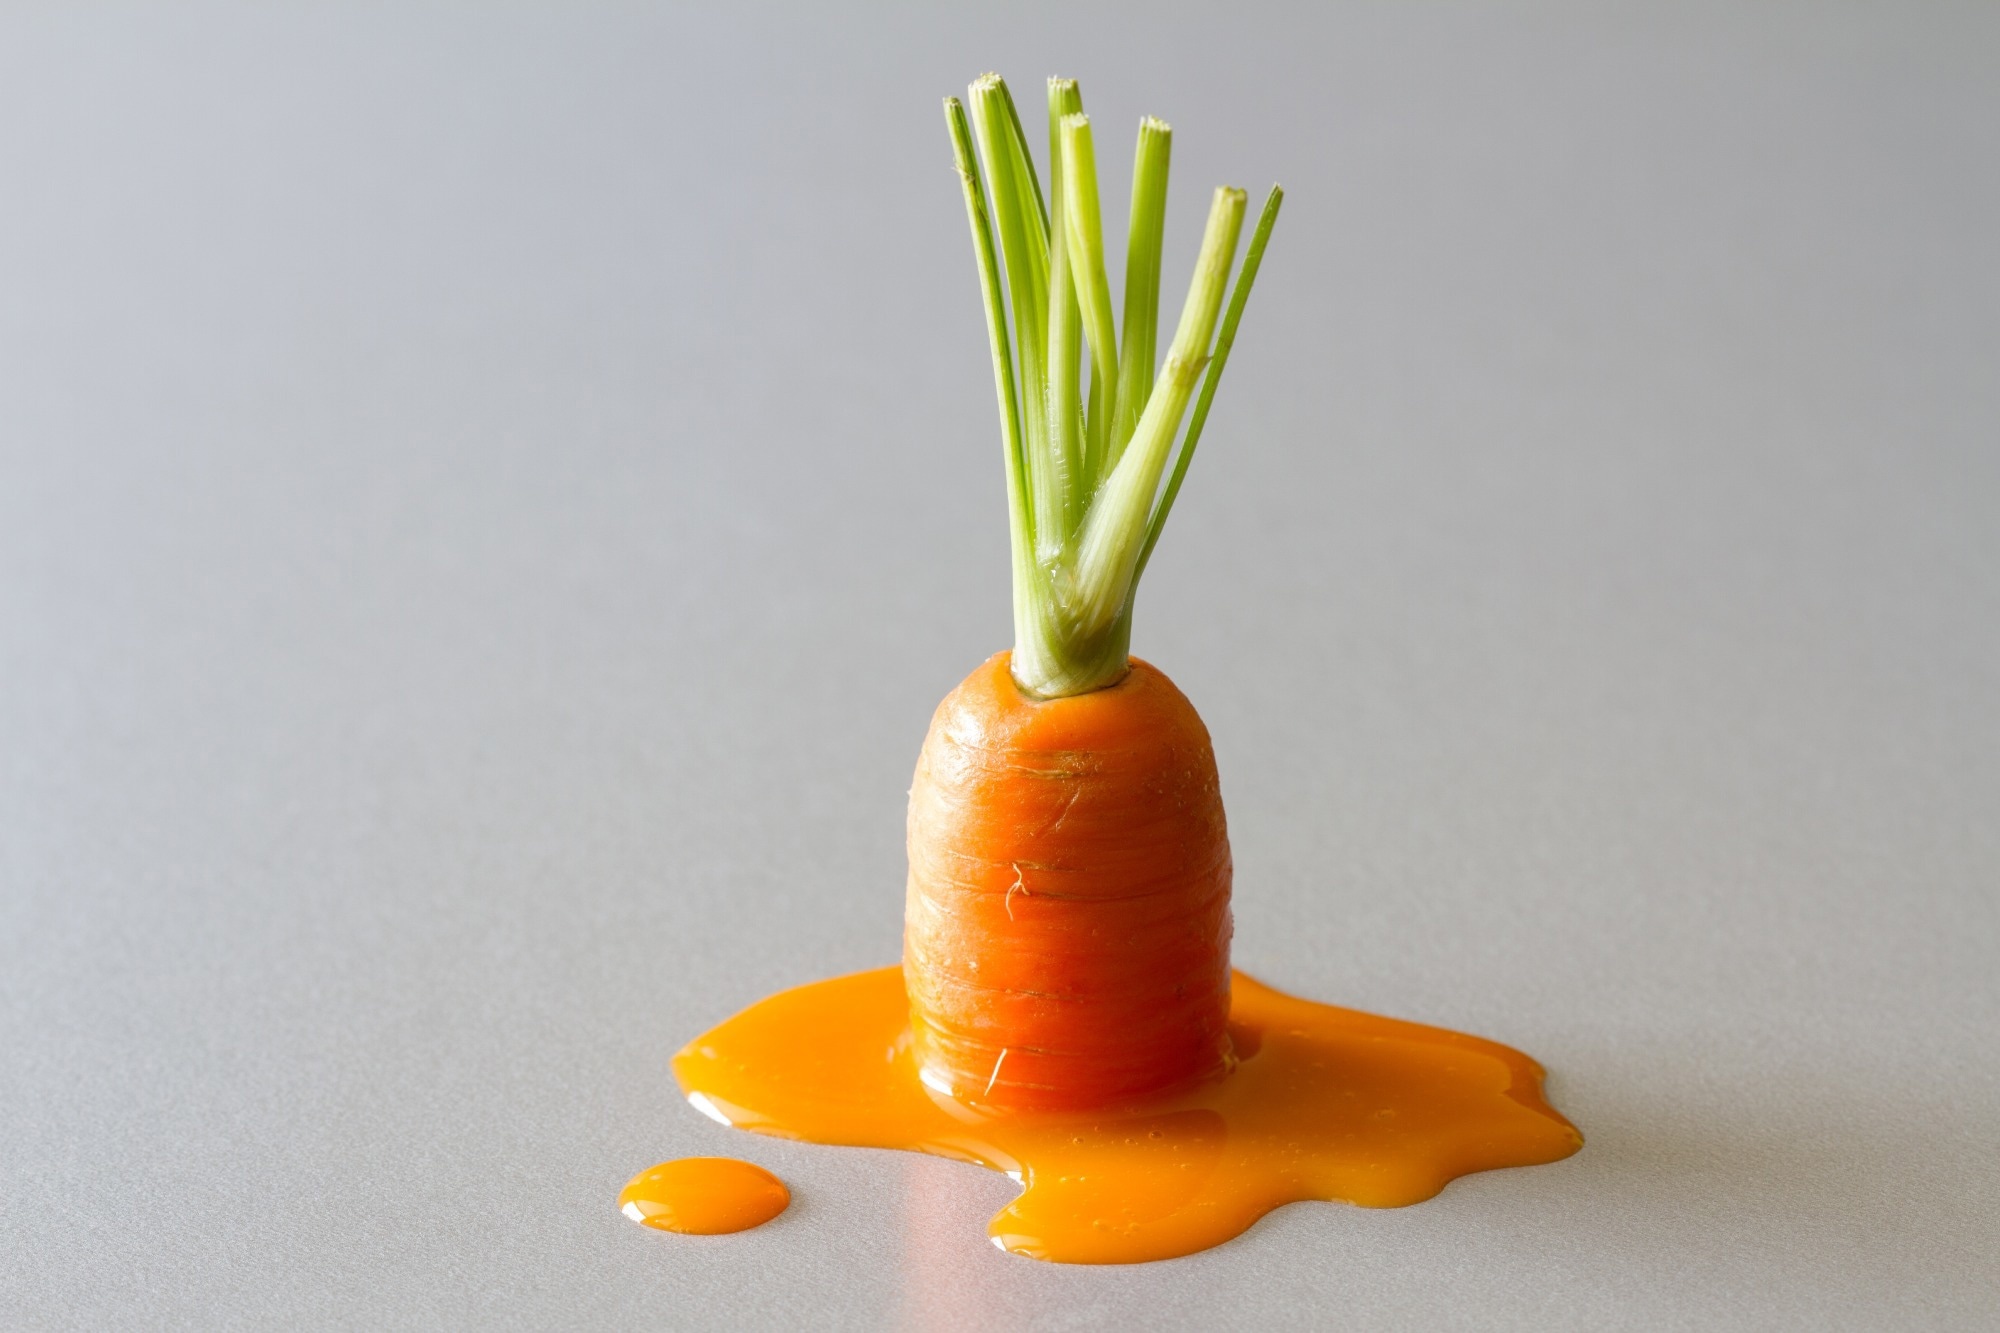 New study finds that consuming carrot juice enhances immune function and reduces inflammation